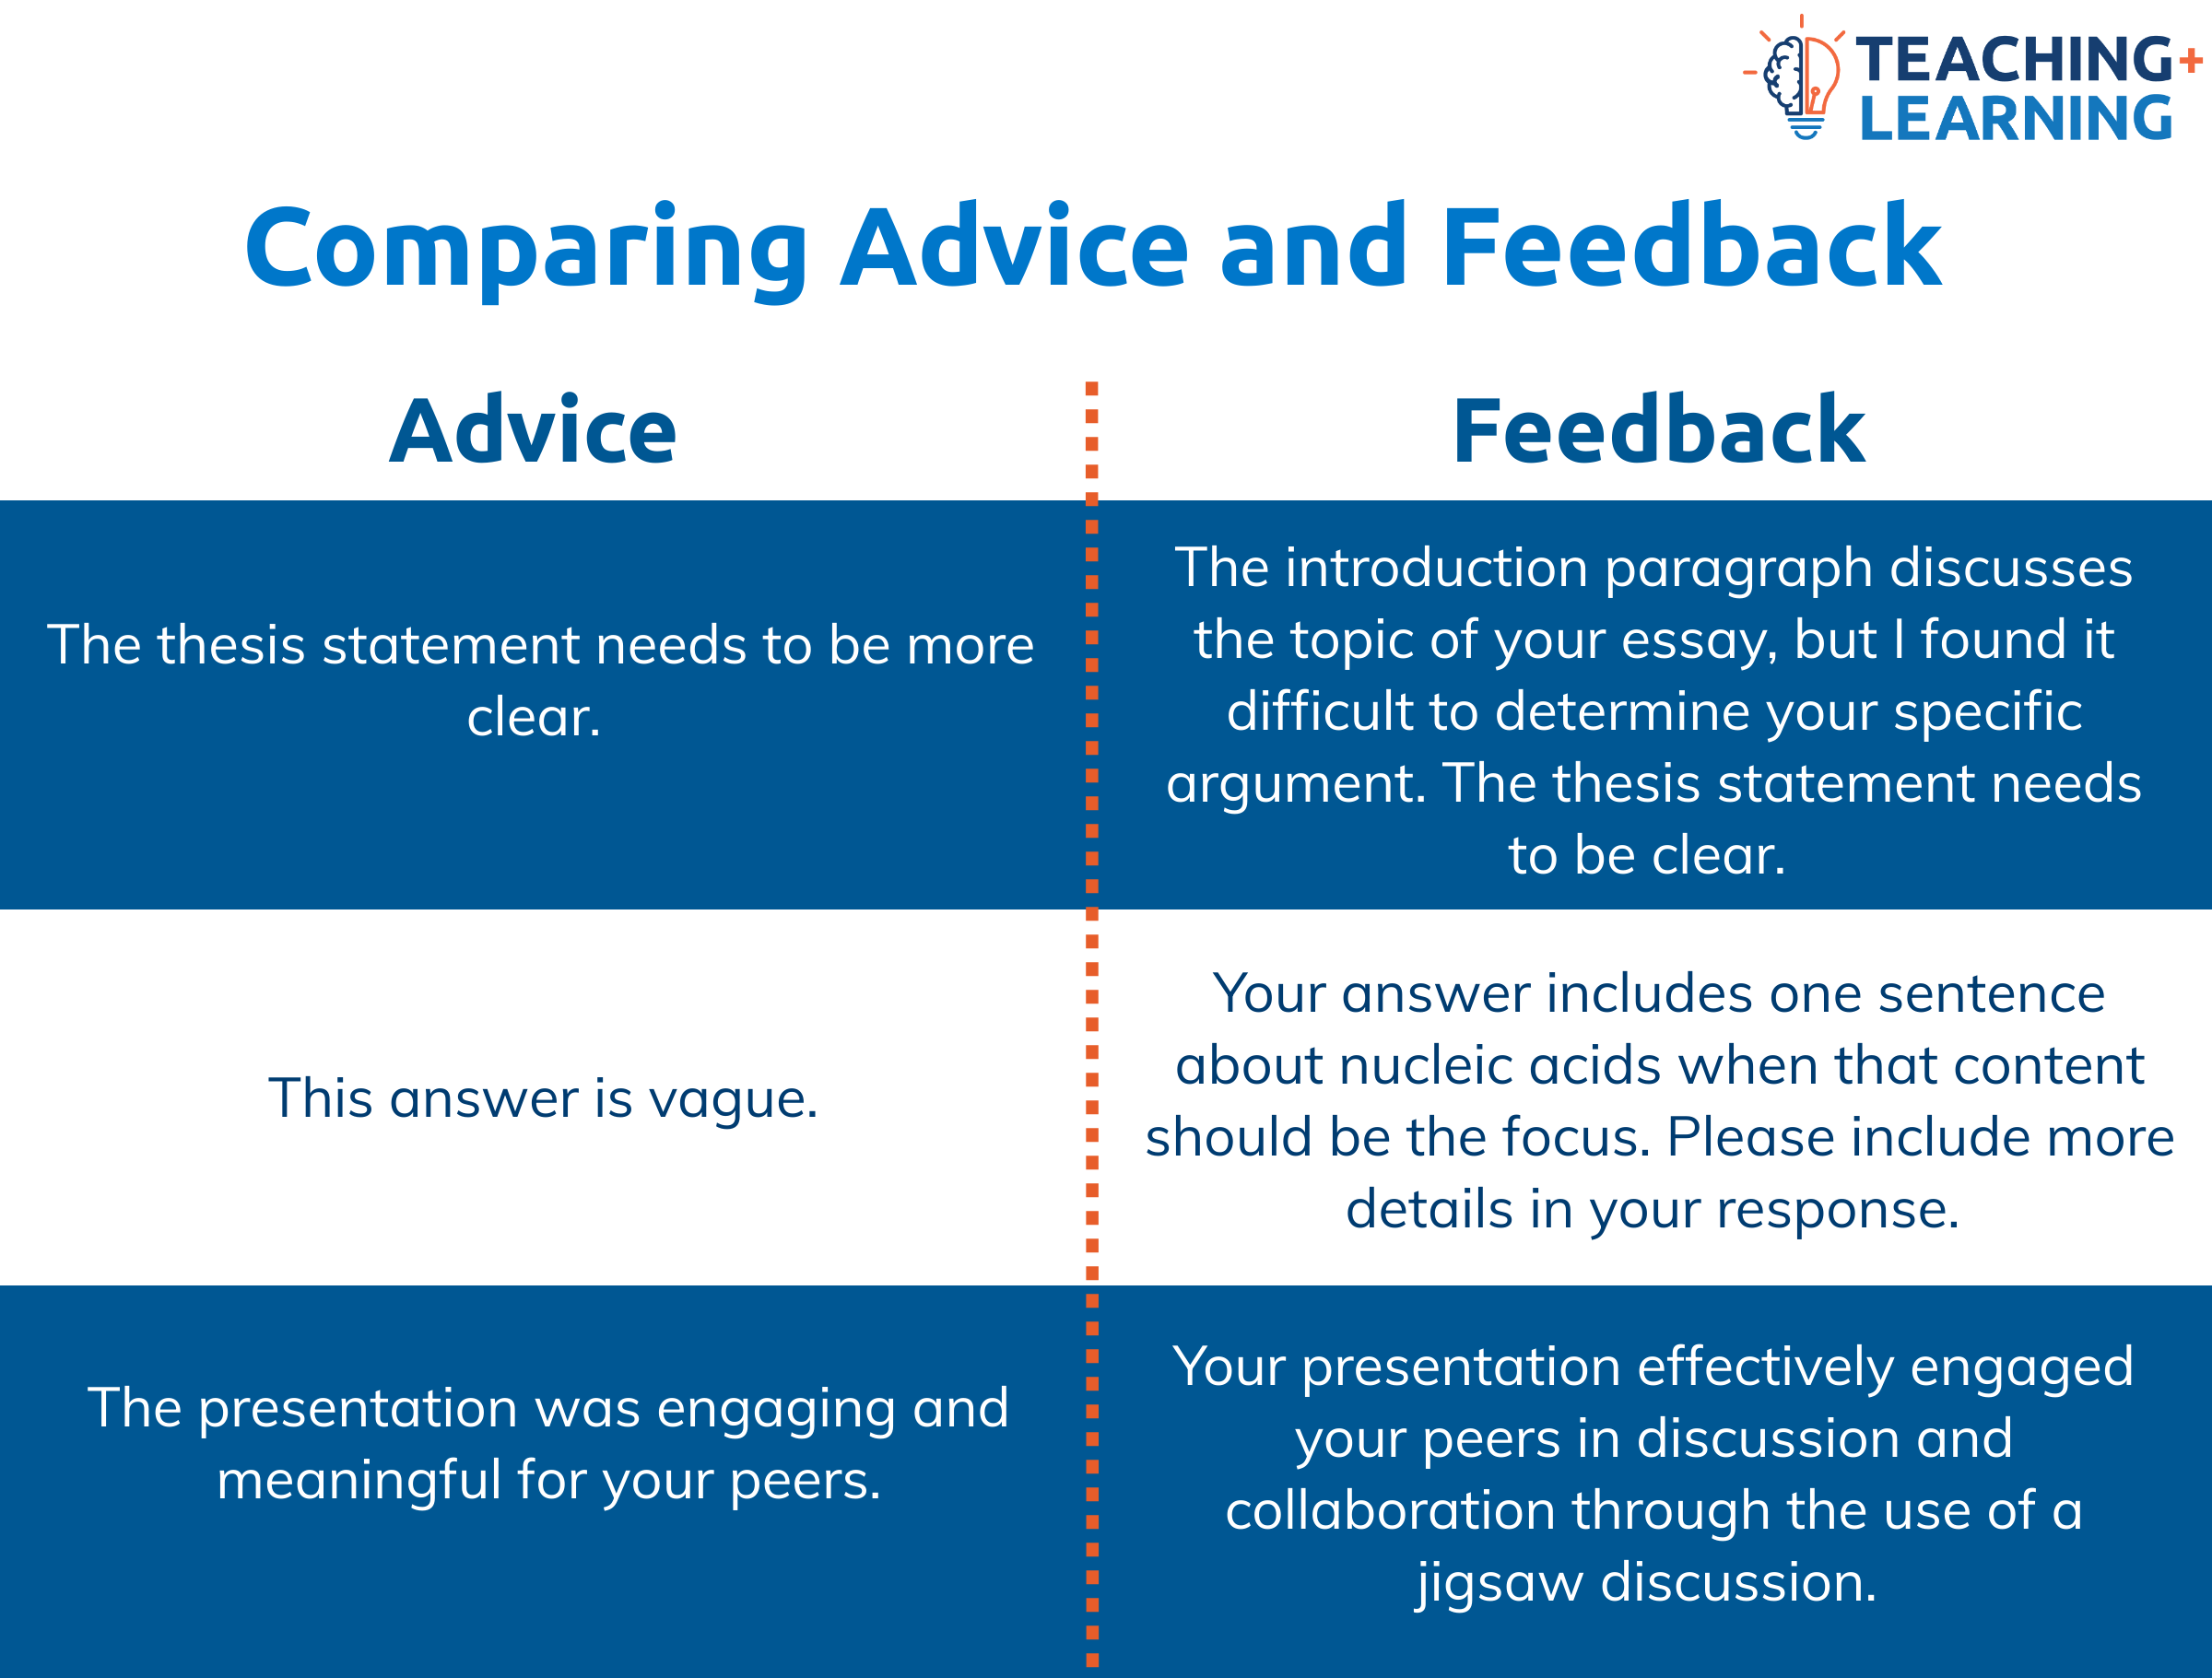 Examples of vague advice vs. detailed and clear feedback.